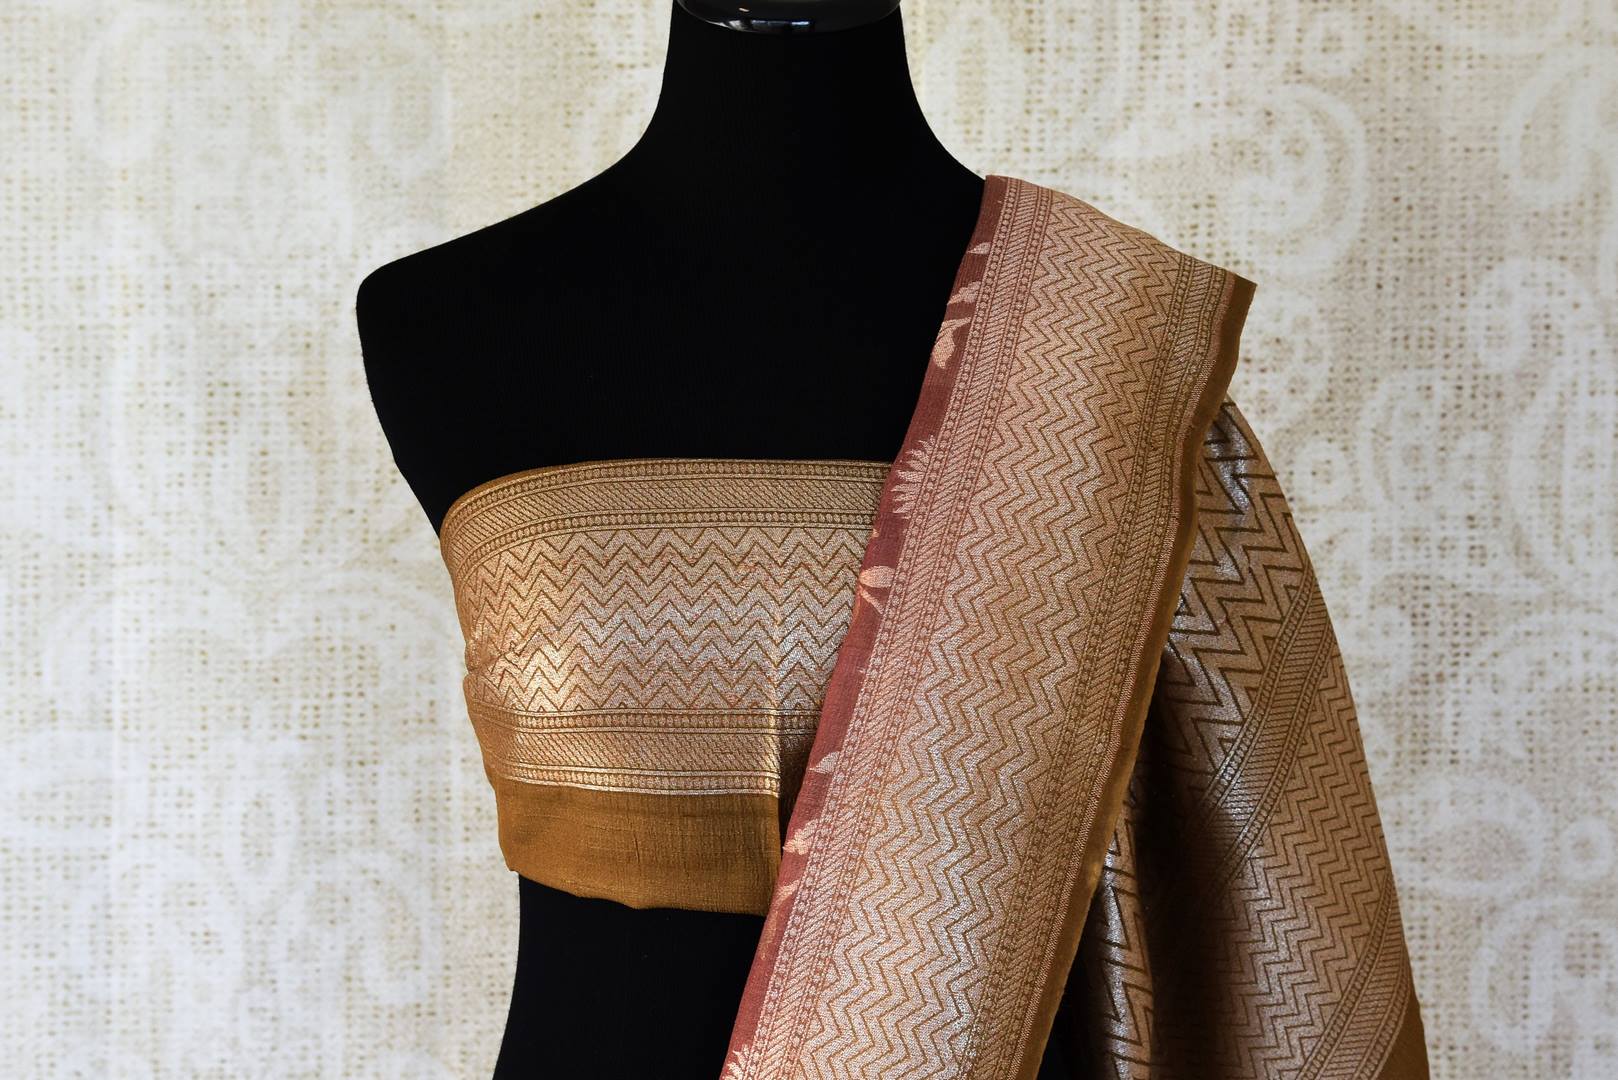 Buy wine color khaddi Benarasi saree online in USA with brown zari border. Feel traditional on special occasions in beautiful Indian designer sarees from Pure Elegance Indian fashion store in USA. Choose from a splendid variety of Banarasi sarees, pure handwoven saris. Buy online.-blouse pallu